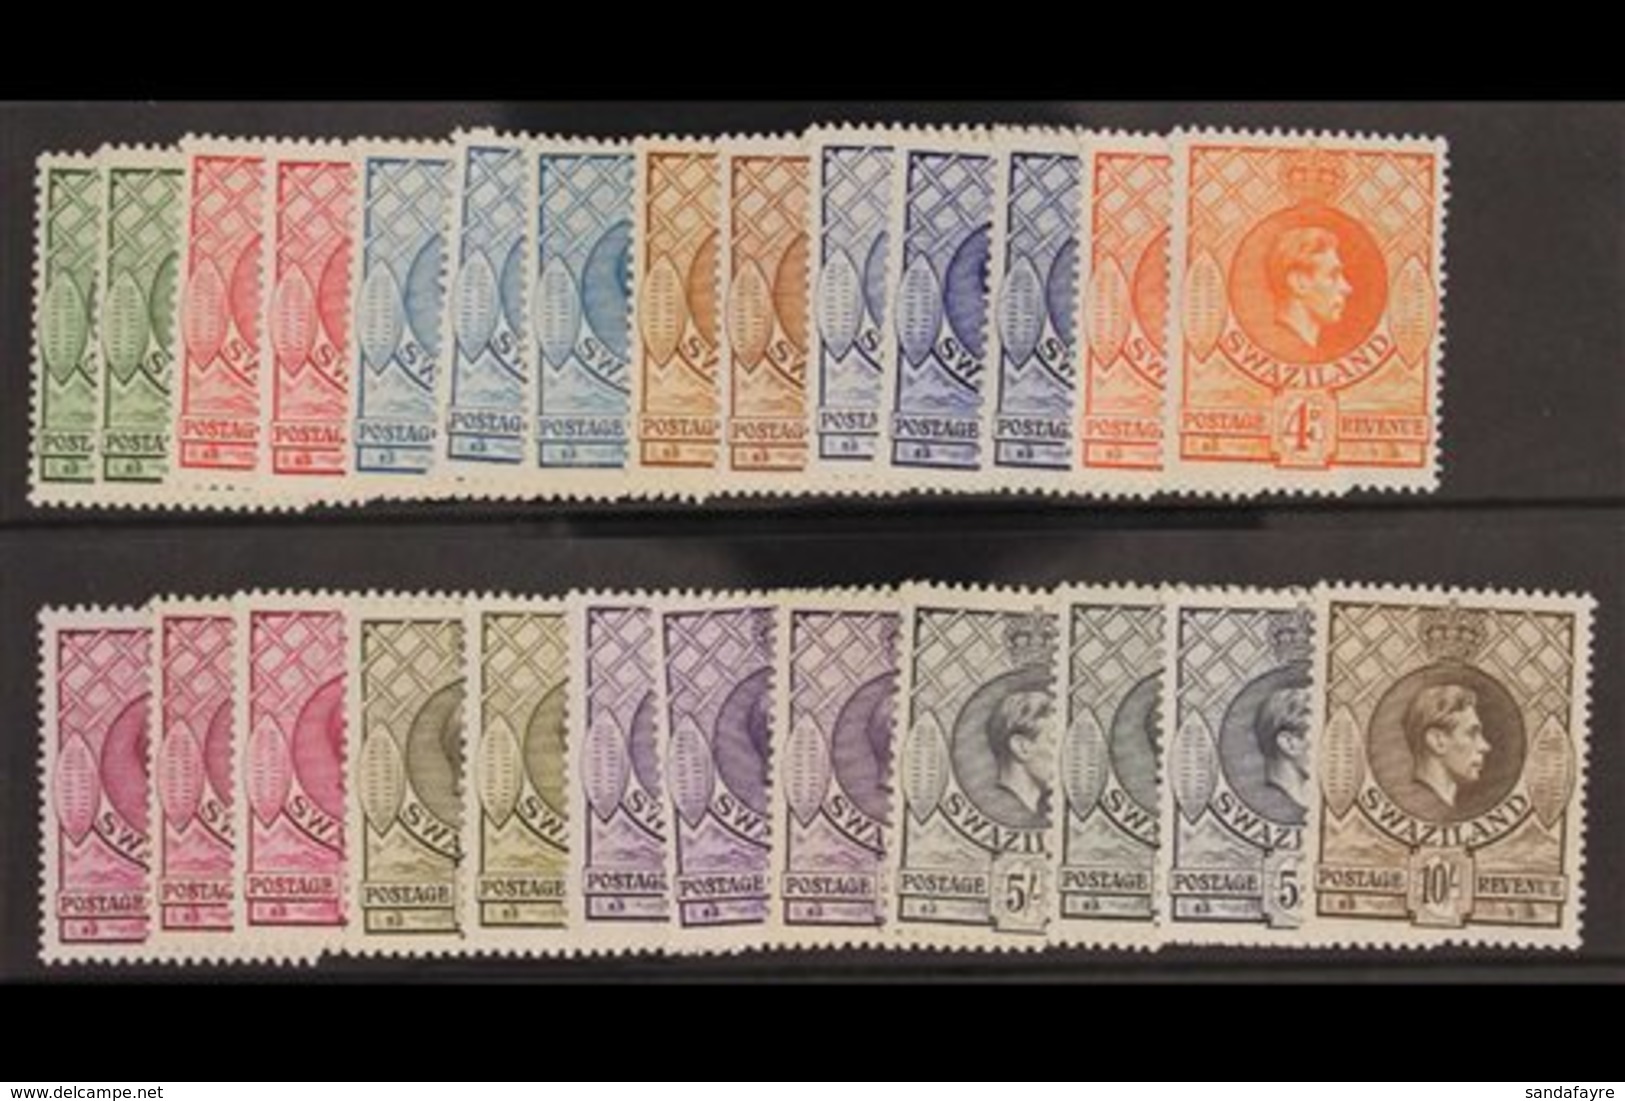 1938-54 Definitive Set, SG 28/38, With Additional Perfs Or Shades To 2s.6d (3) And 5s (3), Fine Mint. (26 Stamps) For Mo - Swasiland (...-1967)